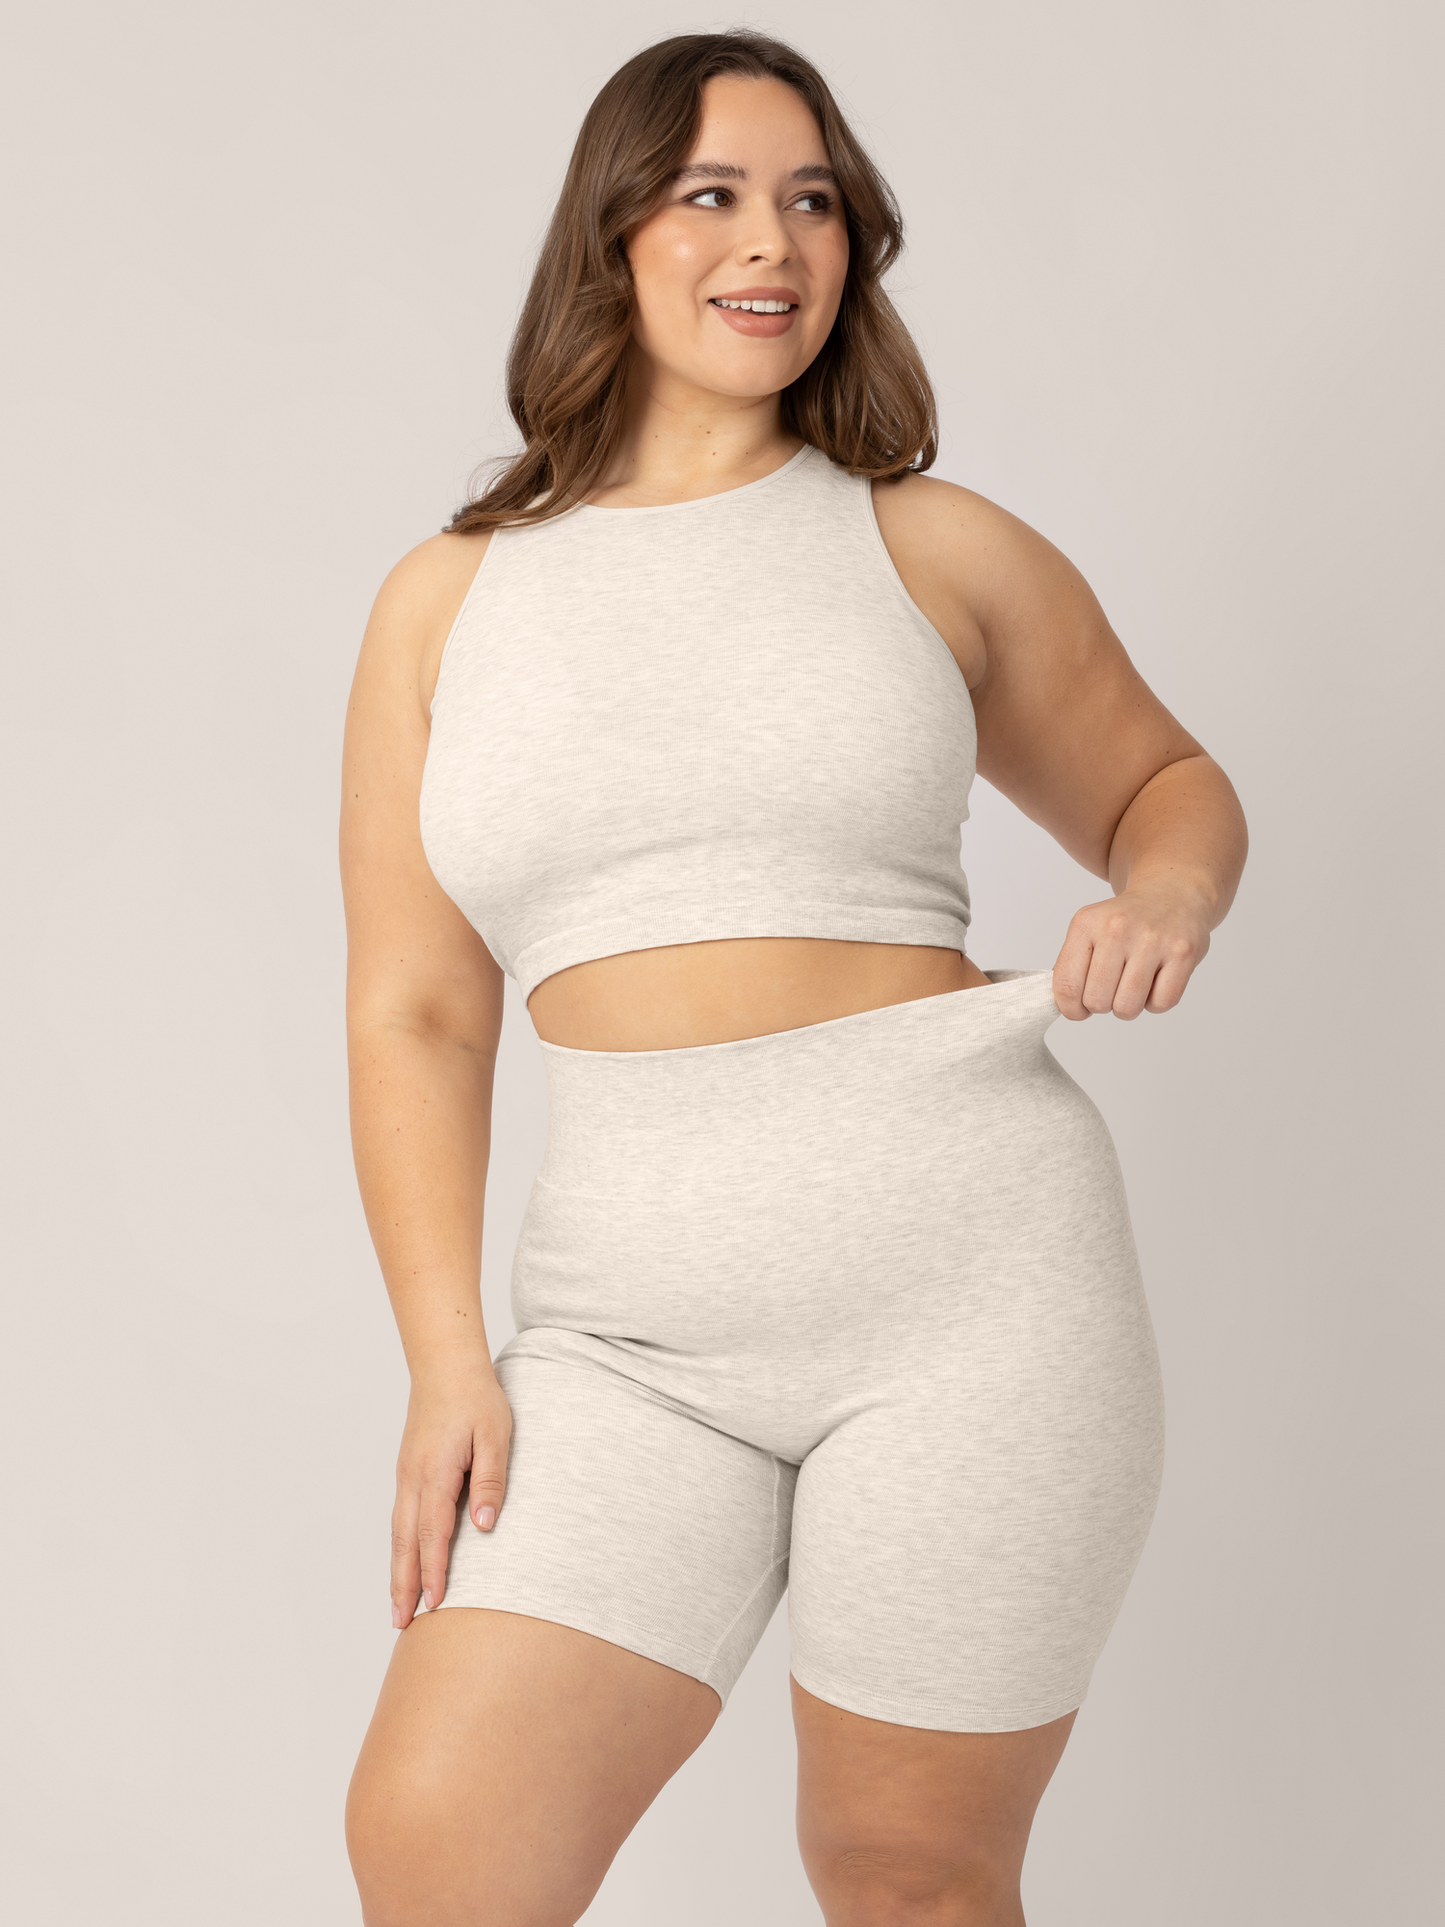 Front view of a model wearing the Sublime® Bamboo Maternity & Postpartum Bike Short in Oatmeal Heather, paired with matching Sublime® Bamboo Maternity & Nursing Longline Bra. @model_info:Venezia is 5’6" and wearing a 1X.